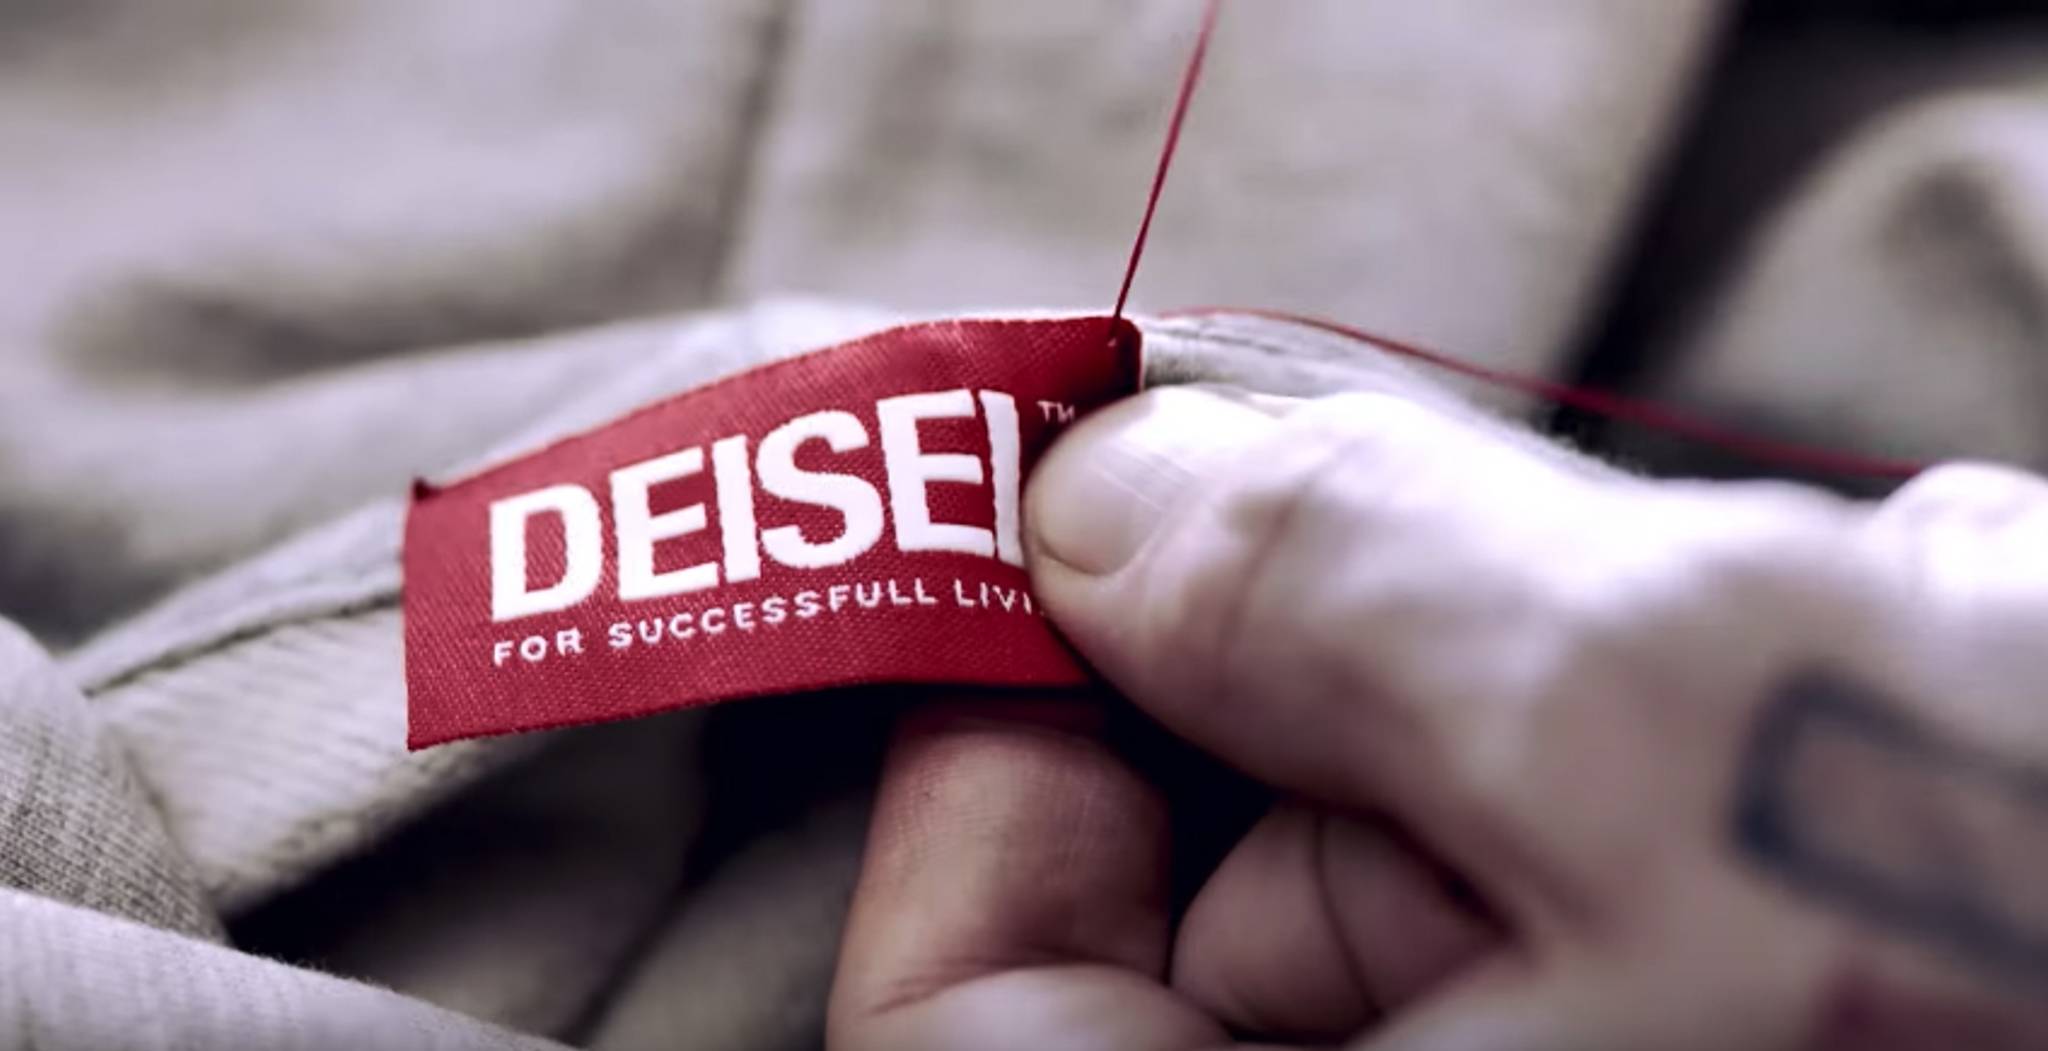 Diesel makes bootlegs of its own clothes to fuel hype